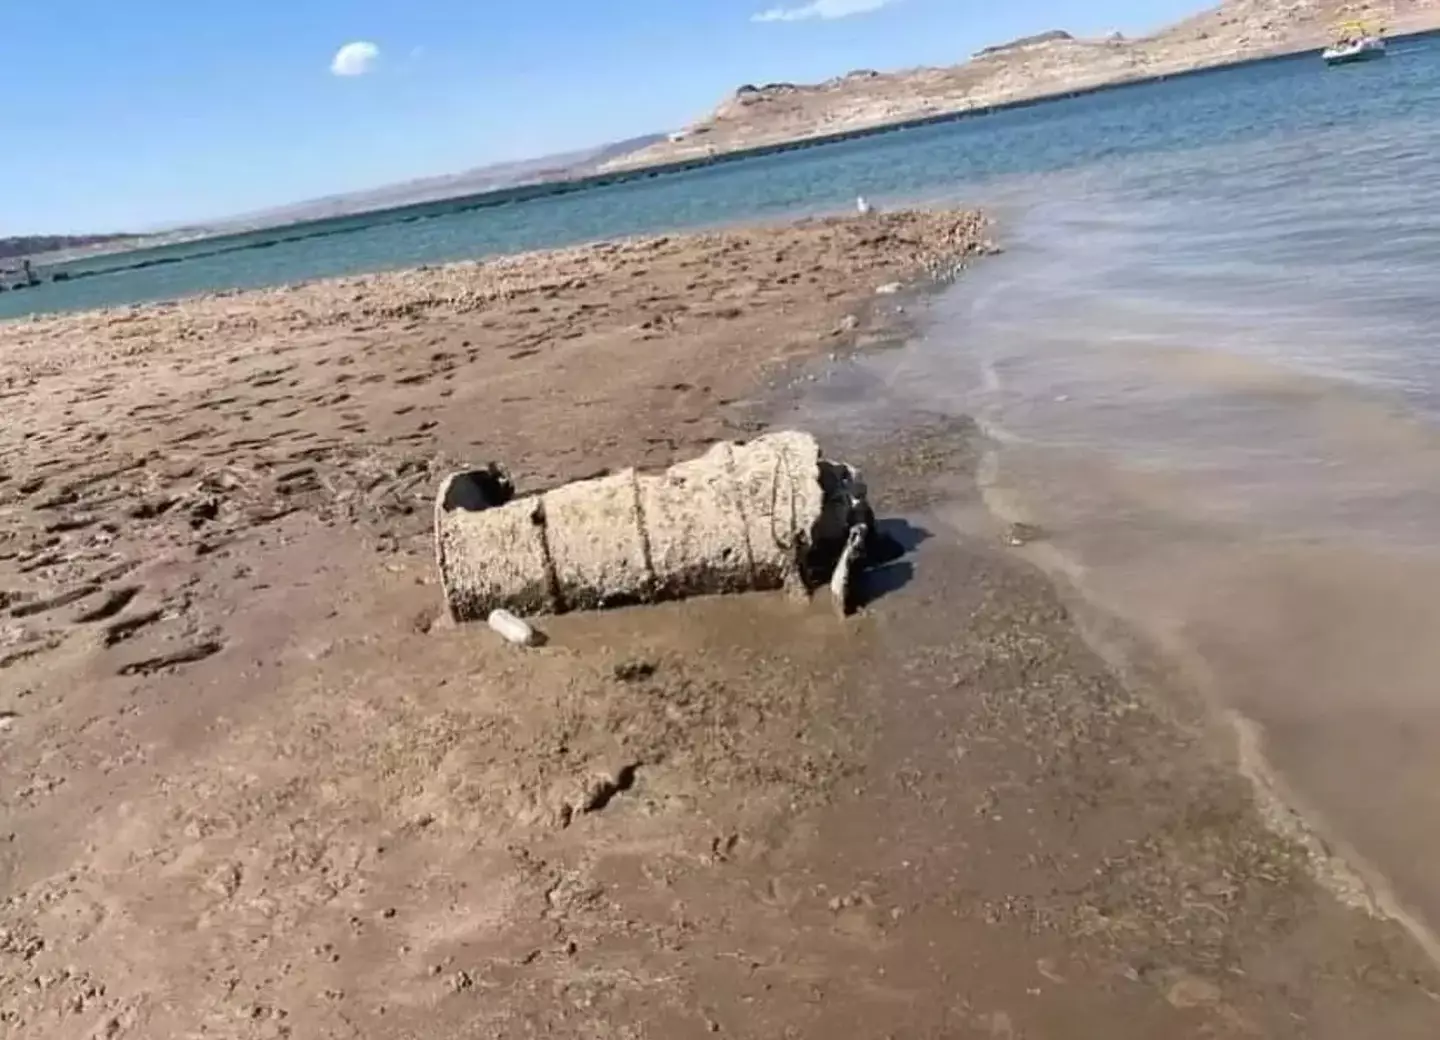 A barrel containing human remains was discovered at Lake Mead earlier this summer.